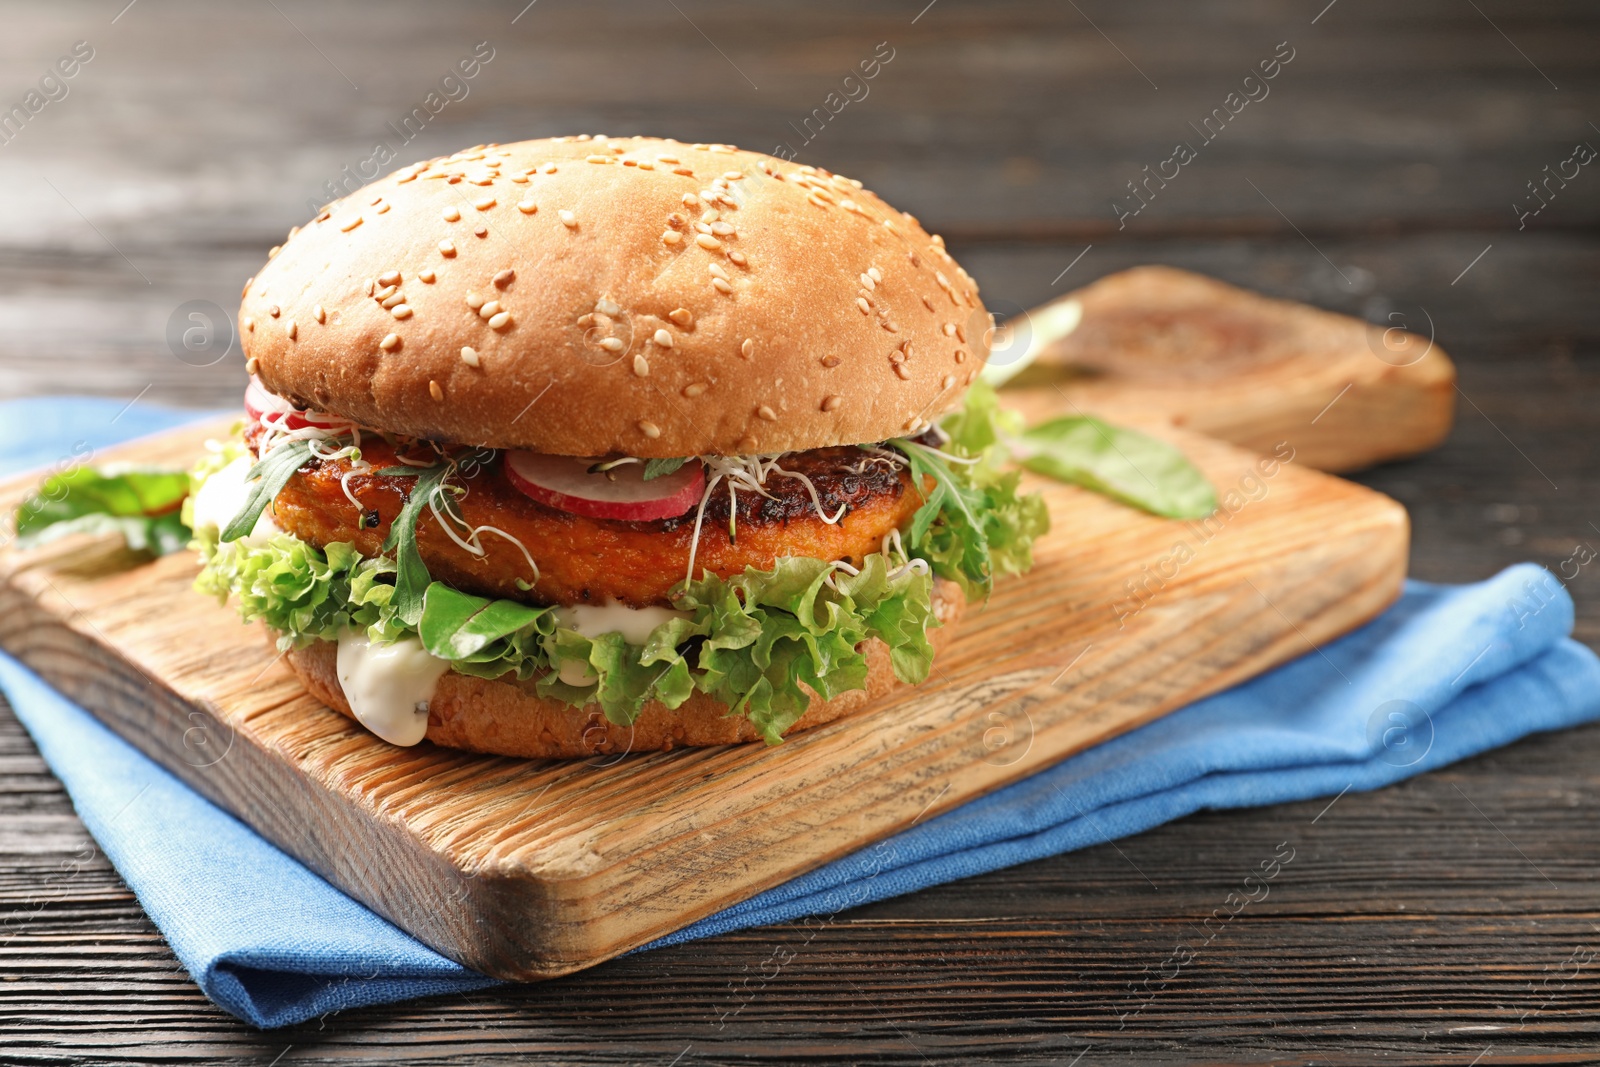 Photo of Board with tasty vegetarian burger on wooden table